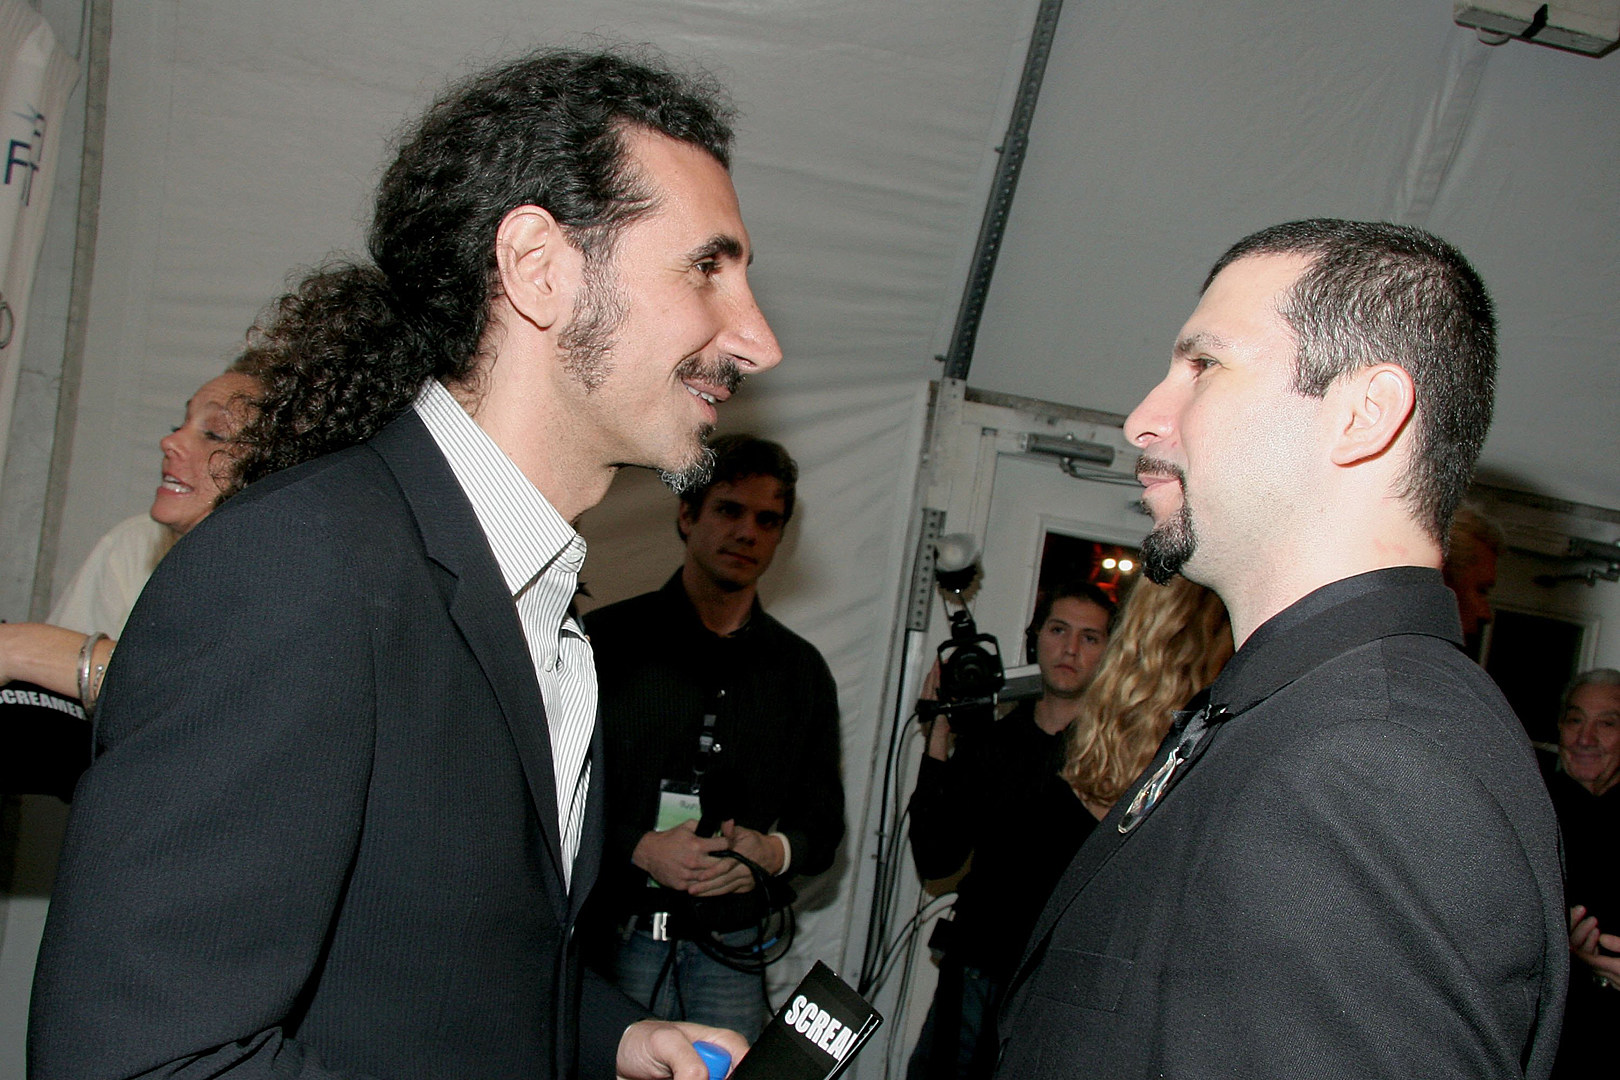 Dolmayan Claims Tankian Hasn’t Wanted System for ‘Long Time’